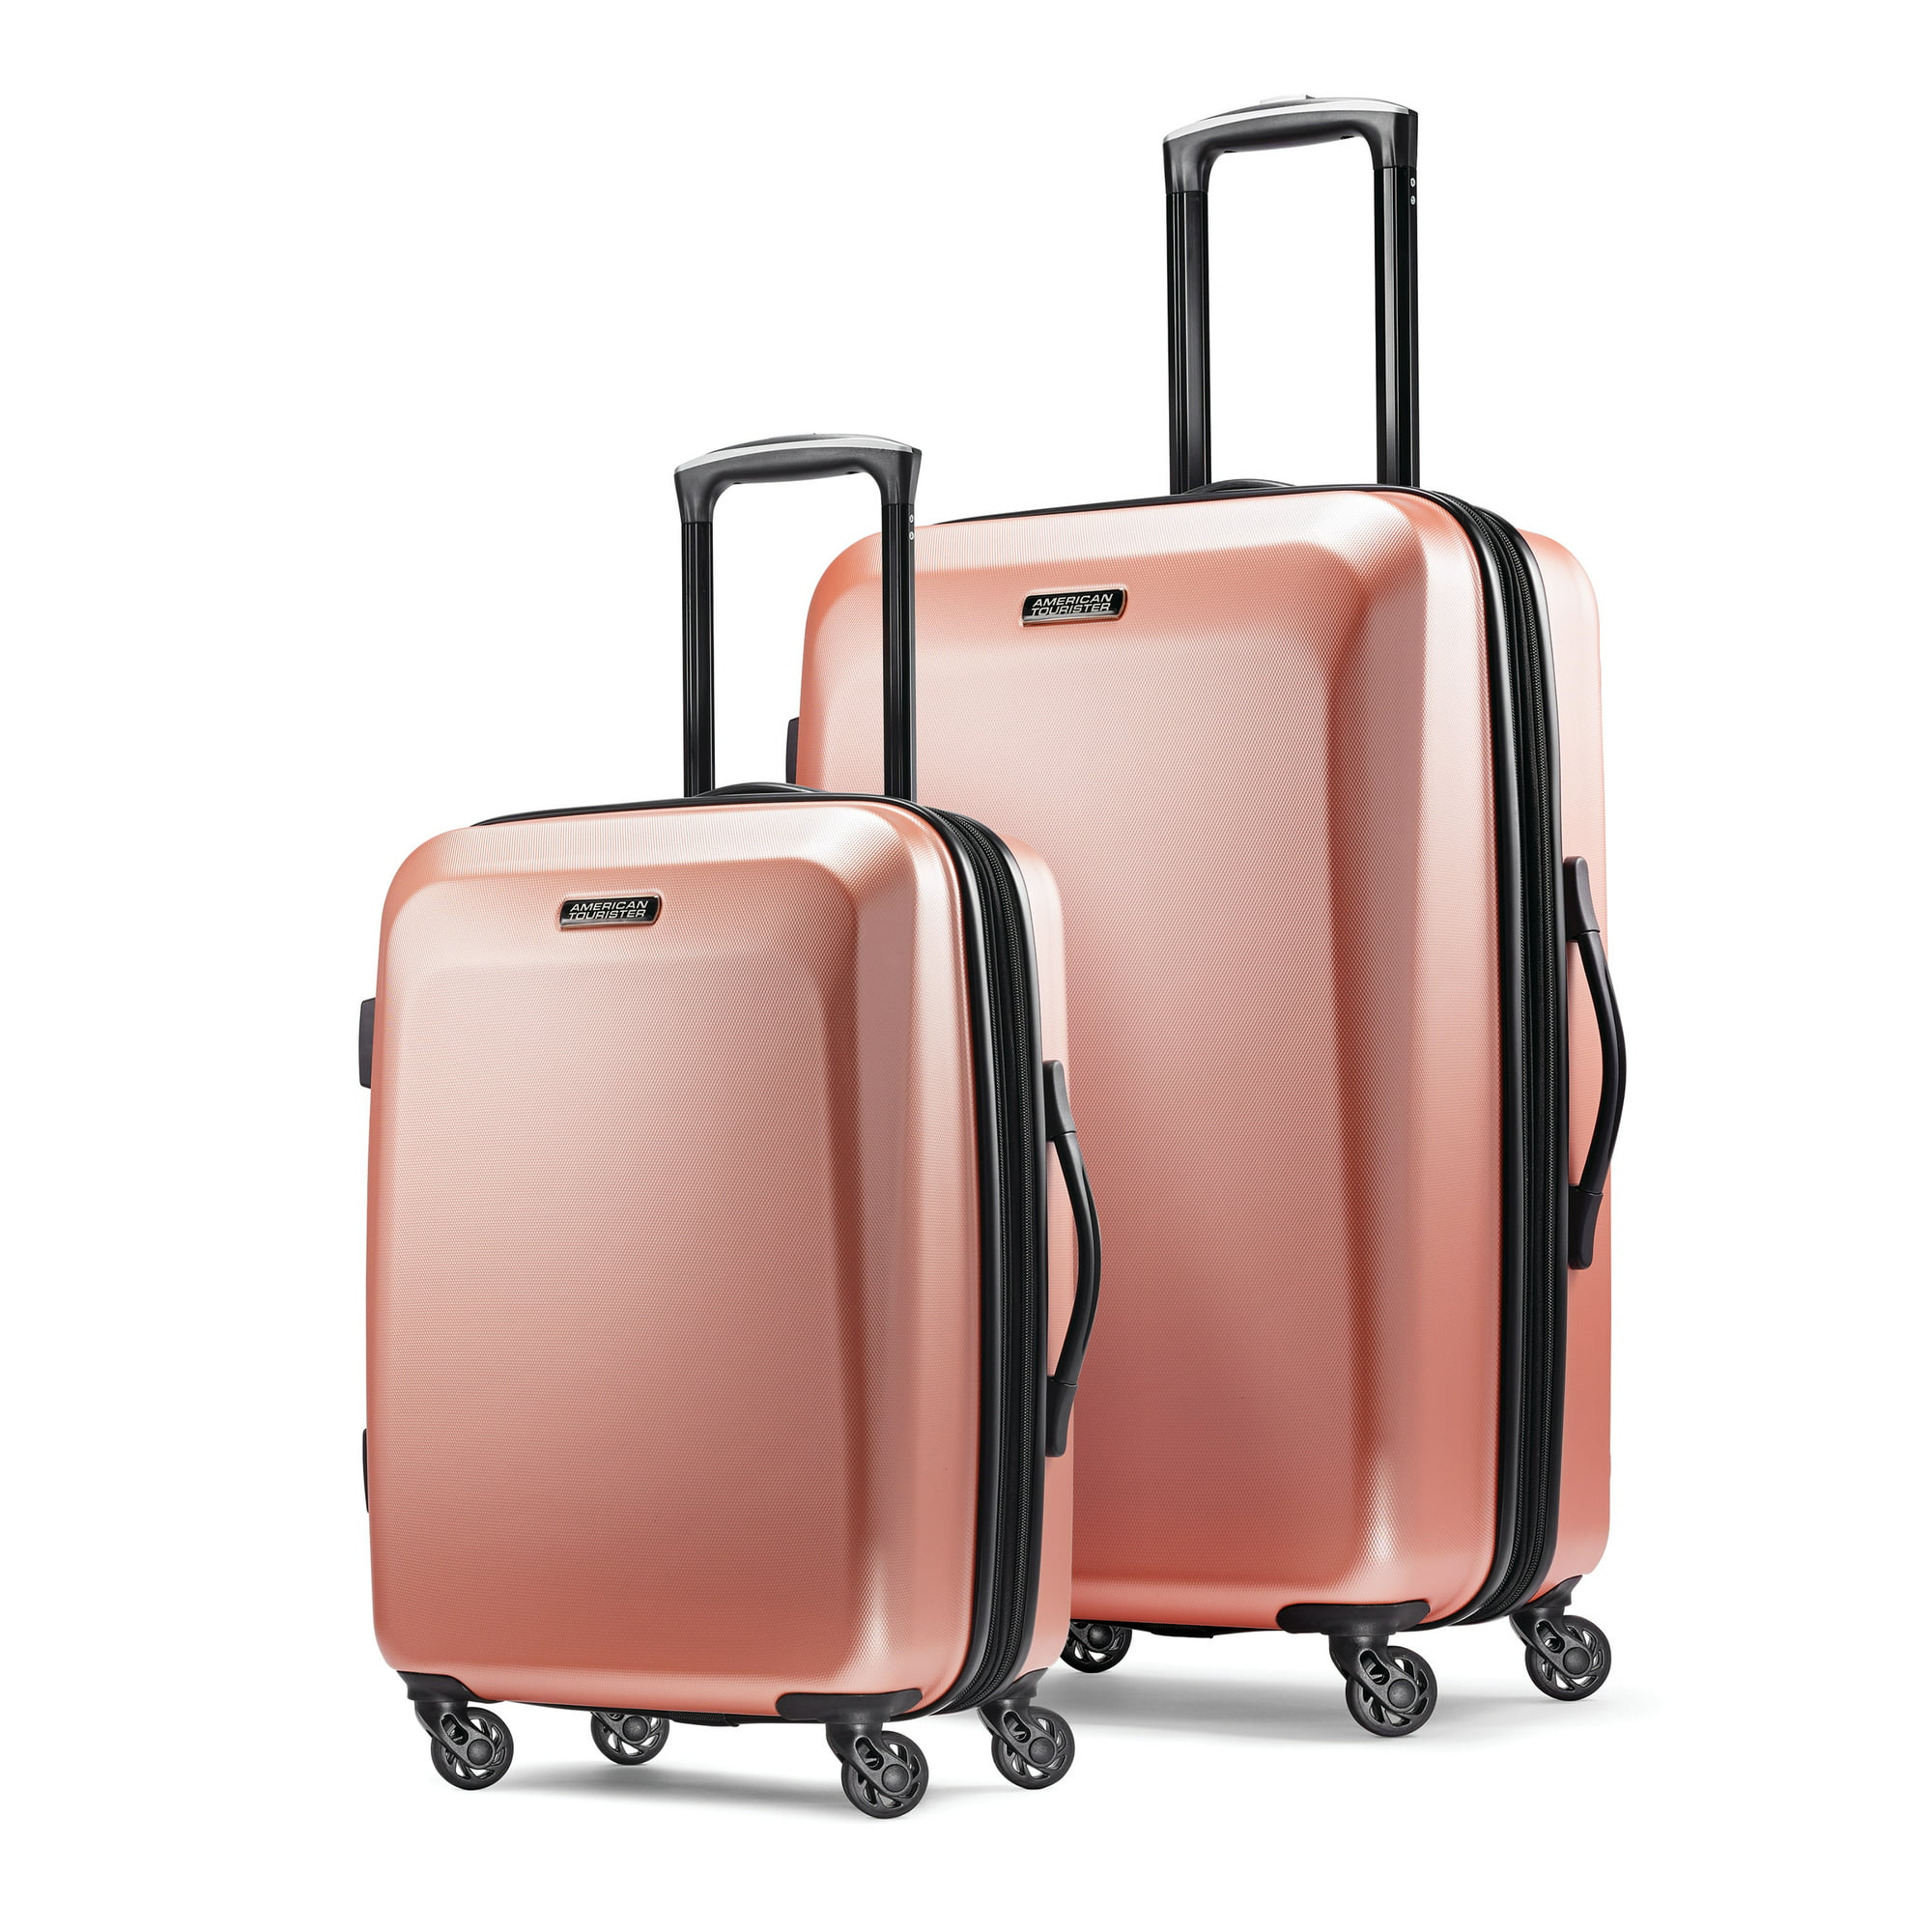 American Tourister Moonlight Hardside Spinner, Rose Gold, 2-Piece Set (21" and 24") $100.16